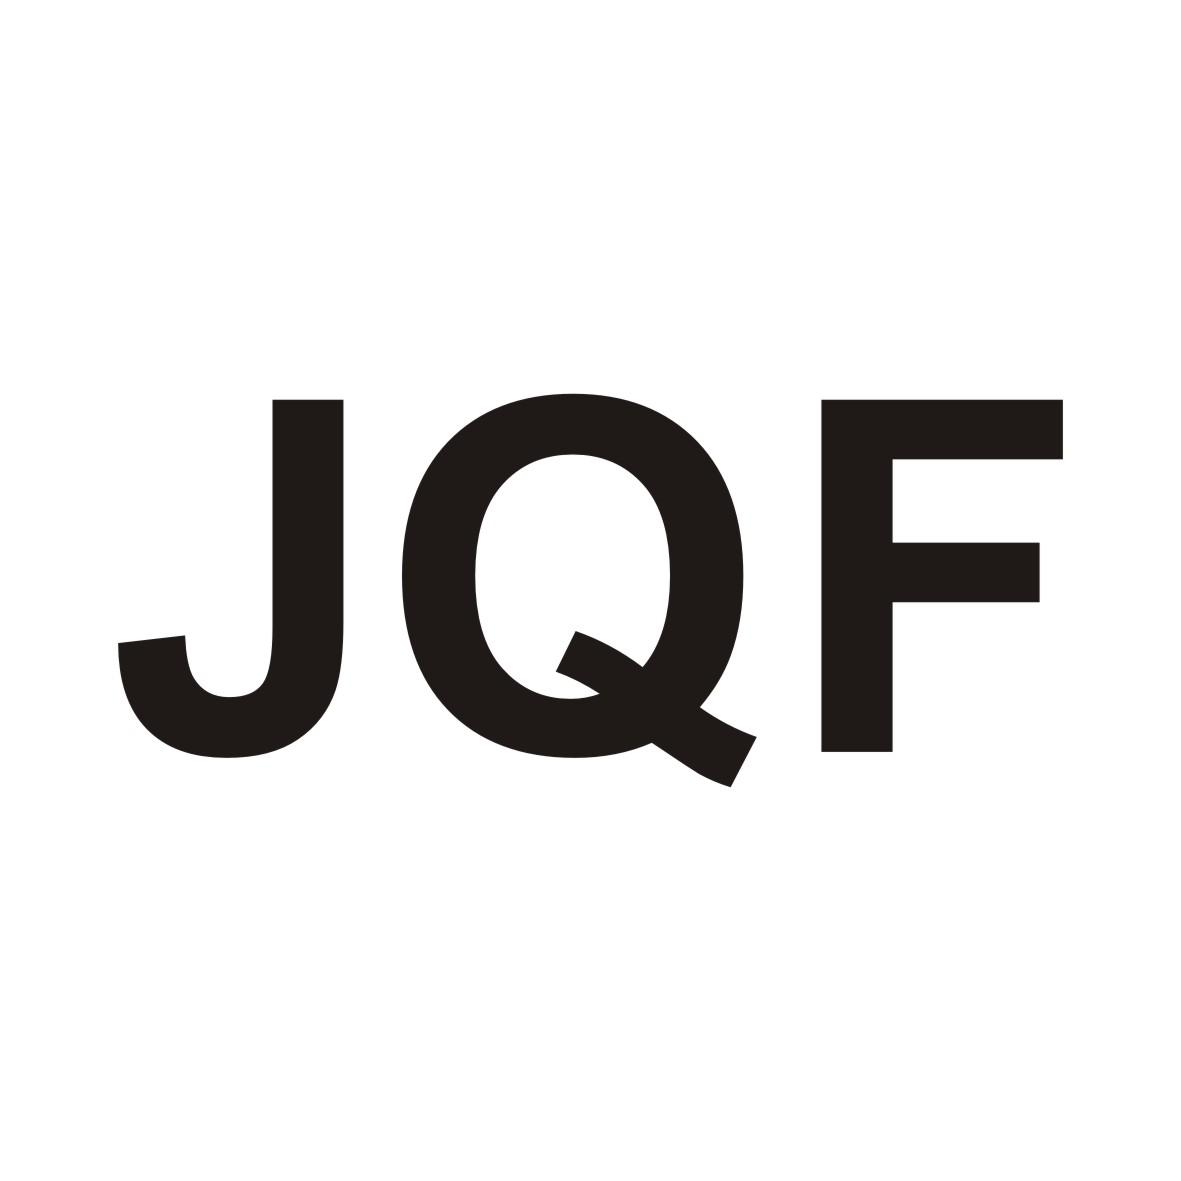 JQF